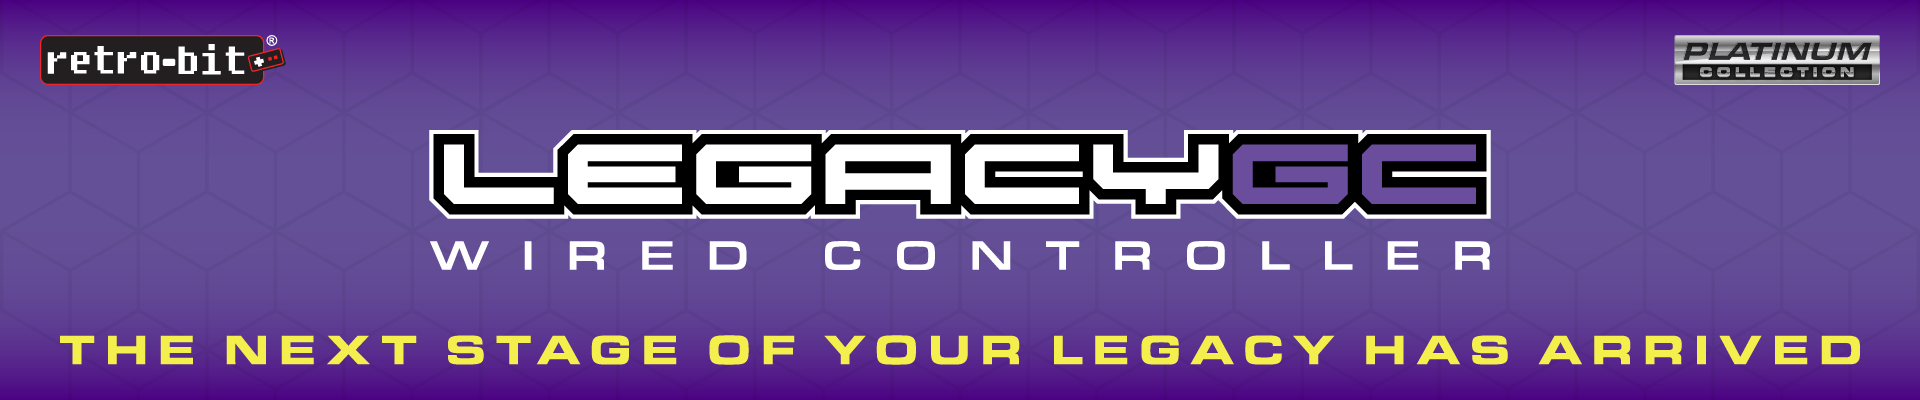 LegacyGC - The Next Stage of your Legacy Has Arrived